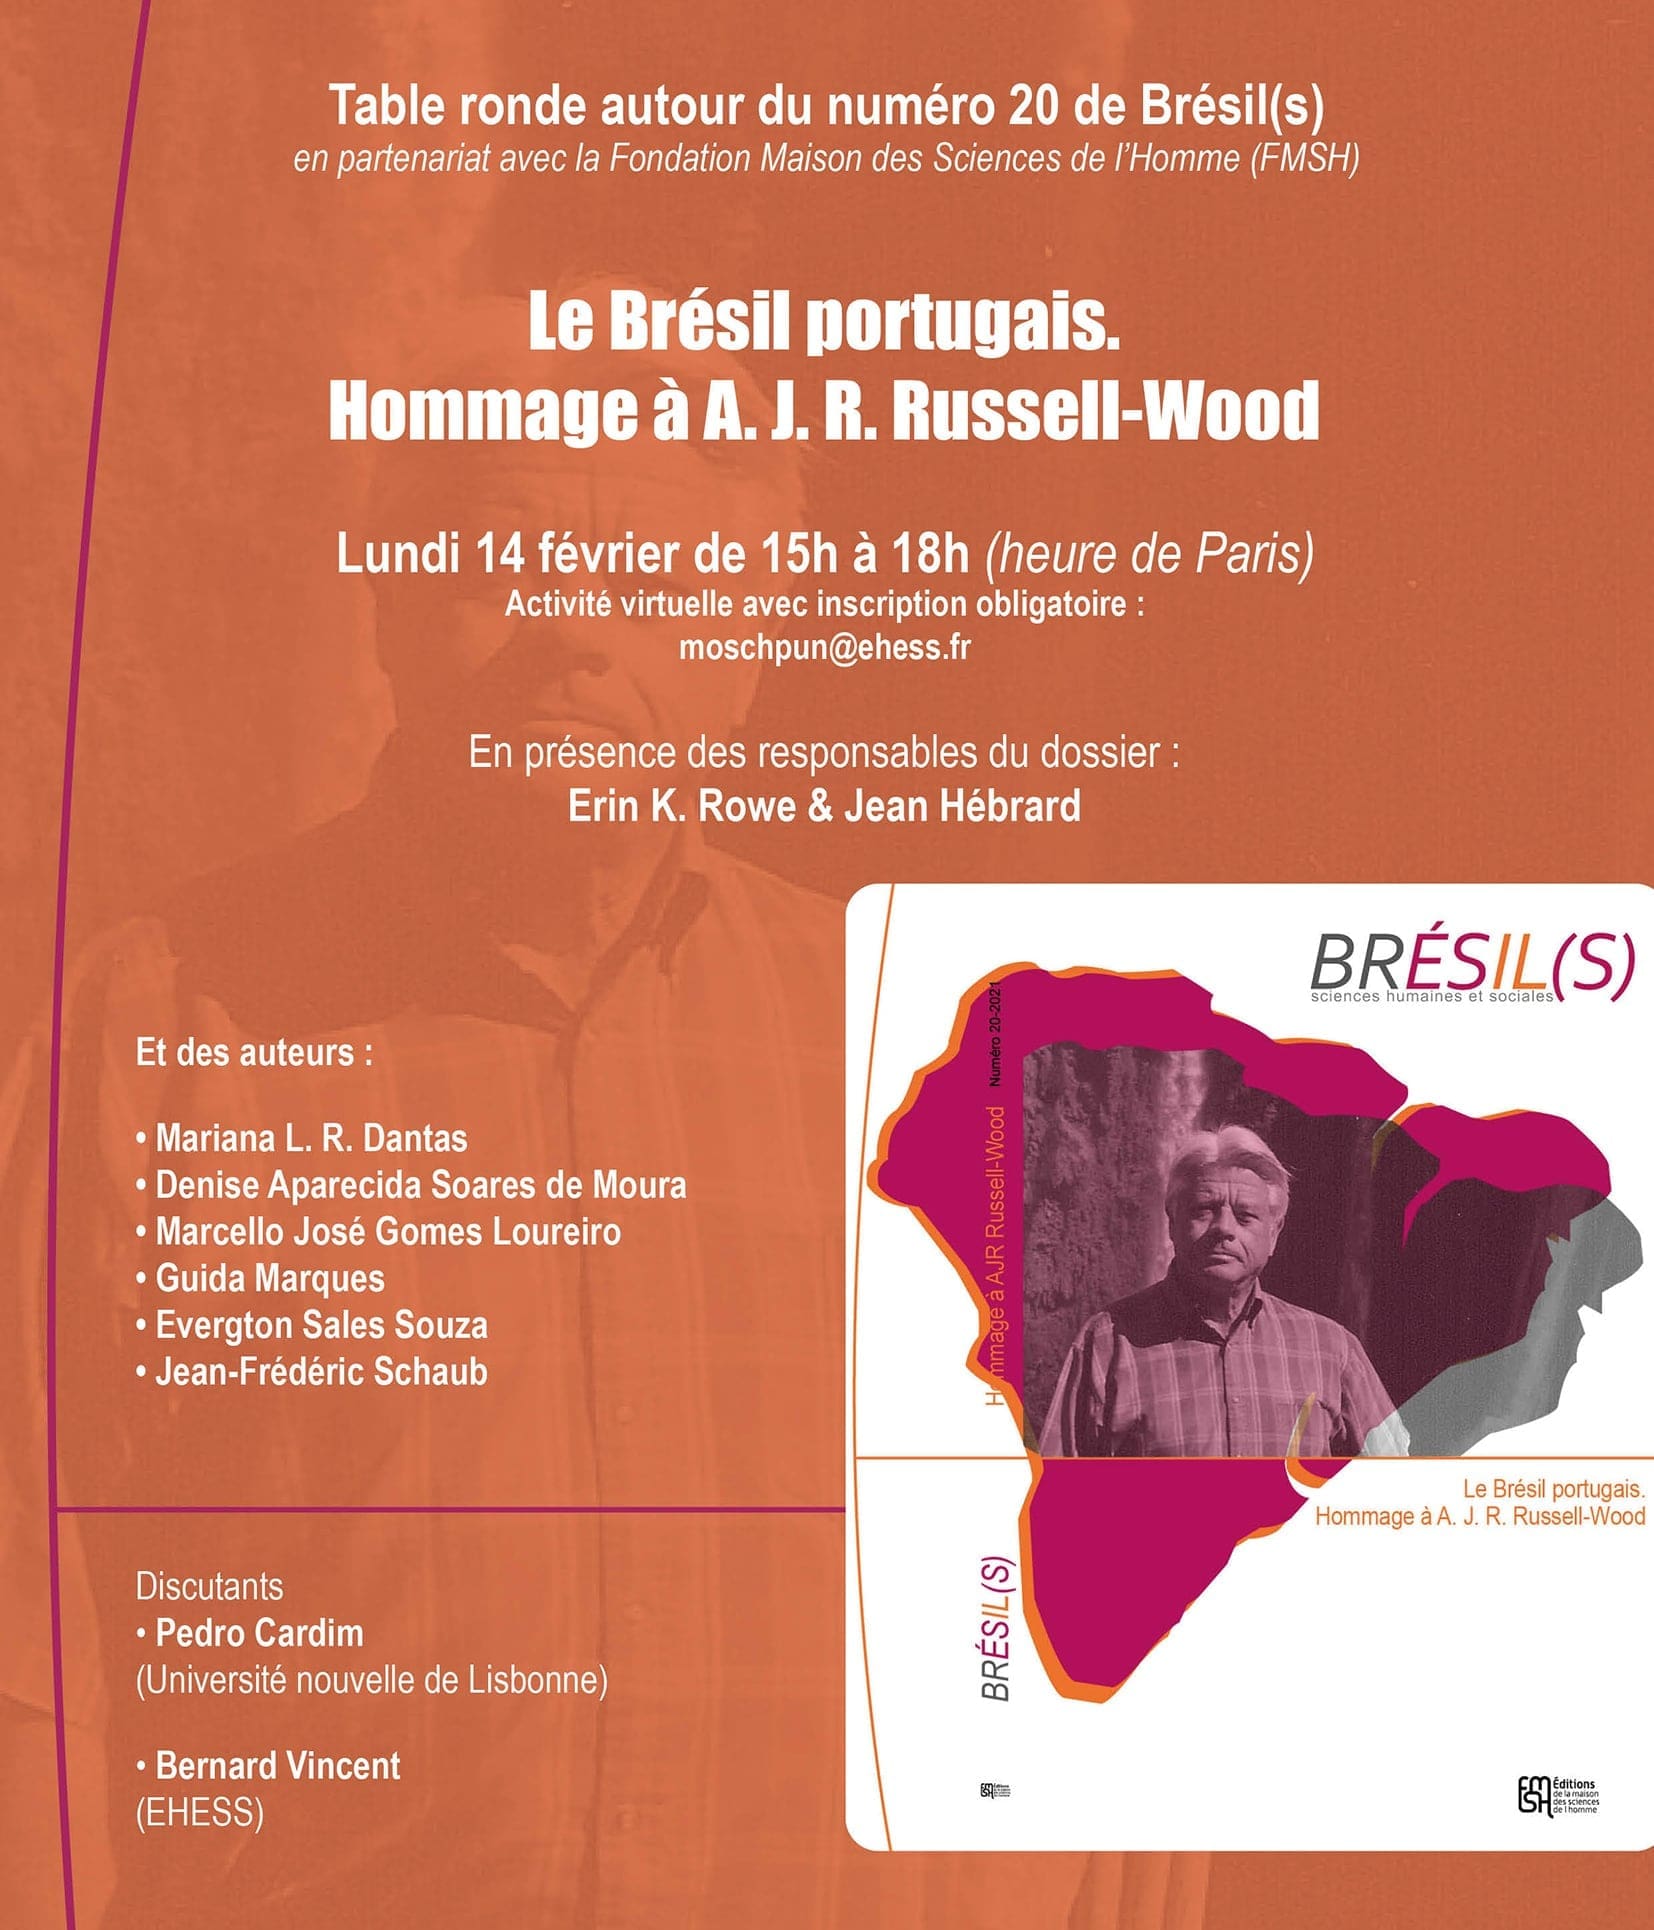 Launching of the special issue of Brésil(s) on John Russell-Wood